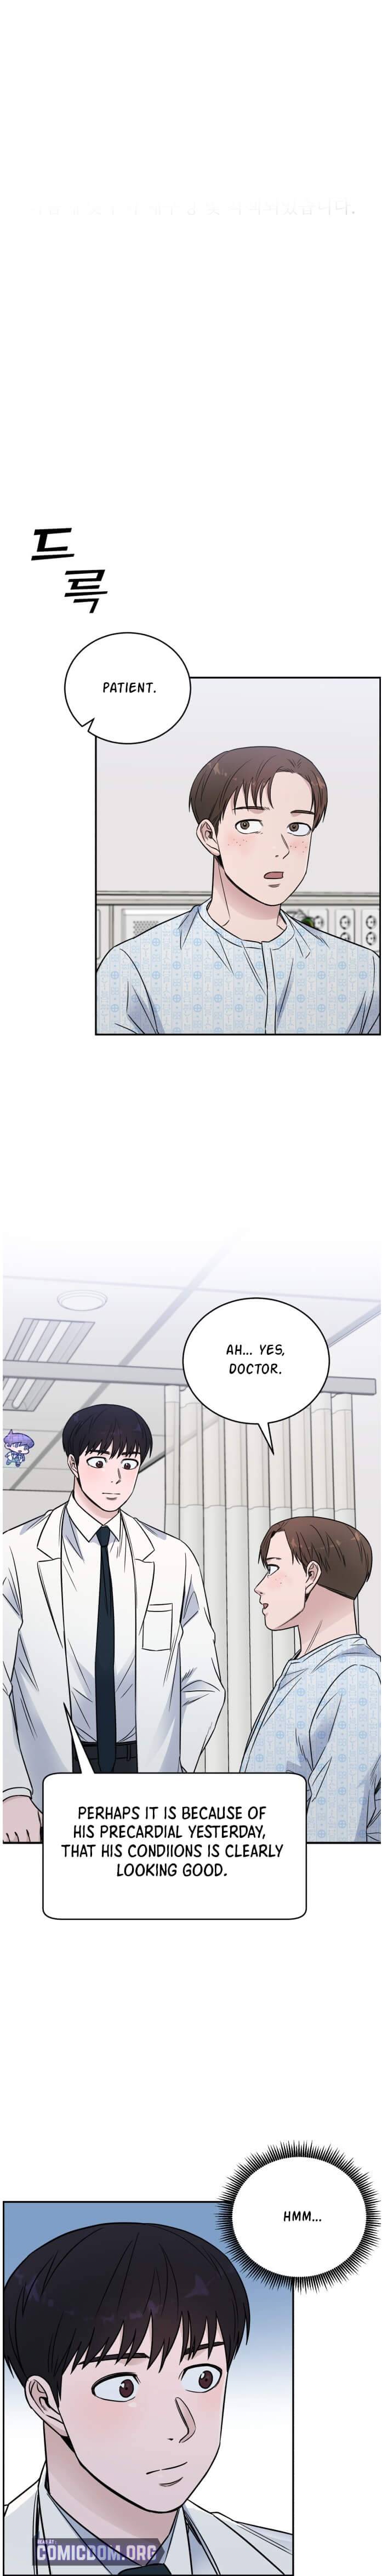 A.I. Doctor - chapter 55 - #2